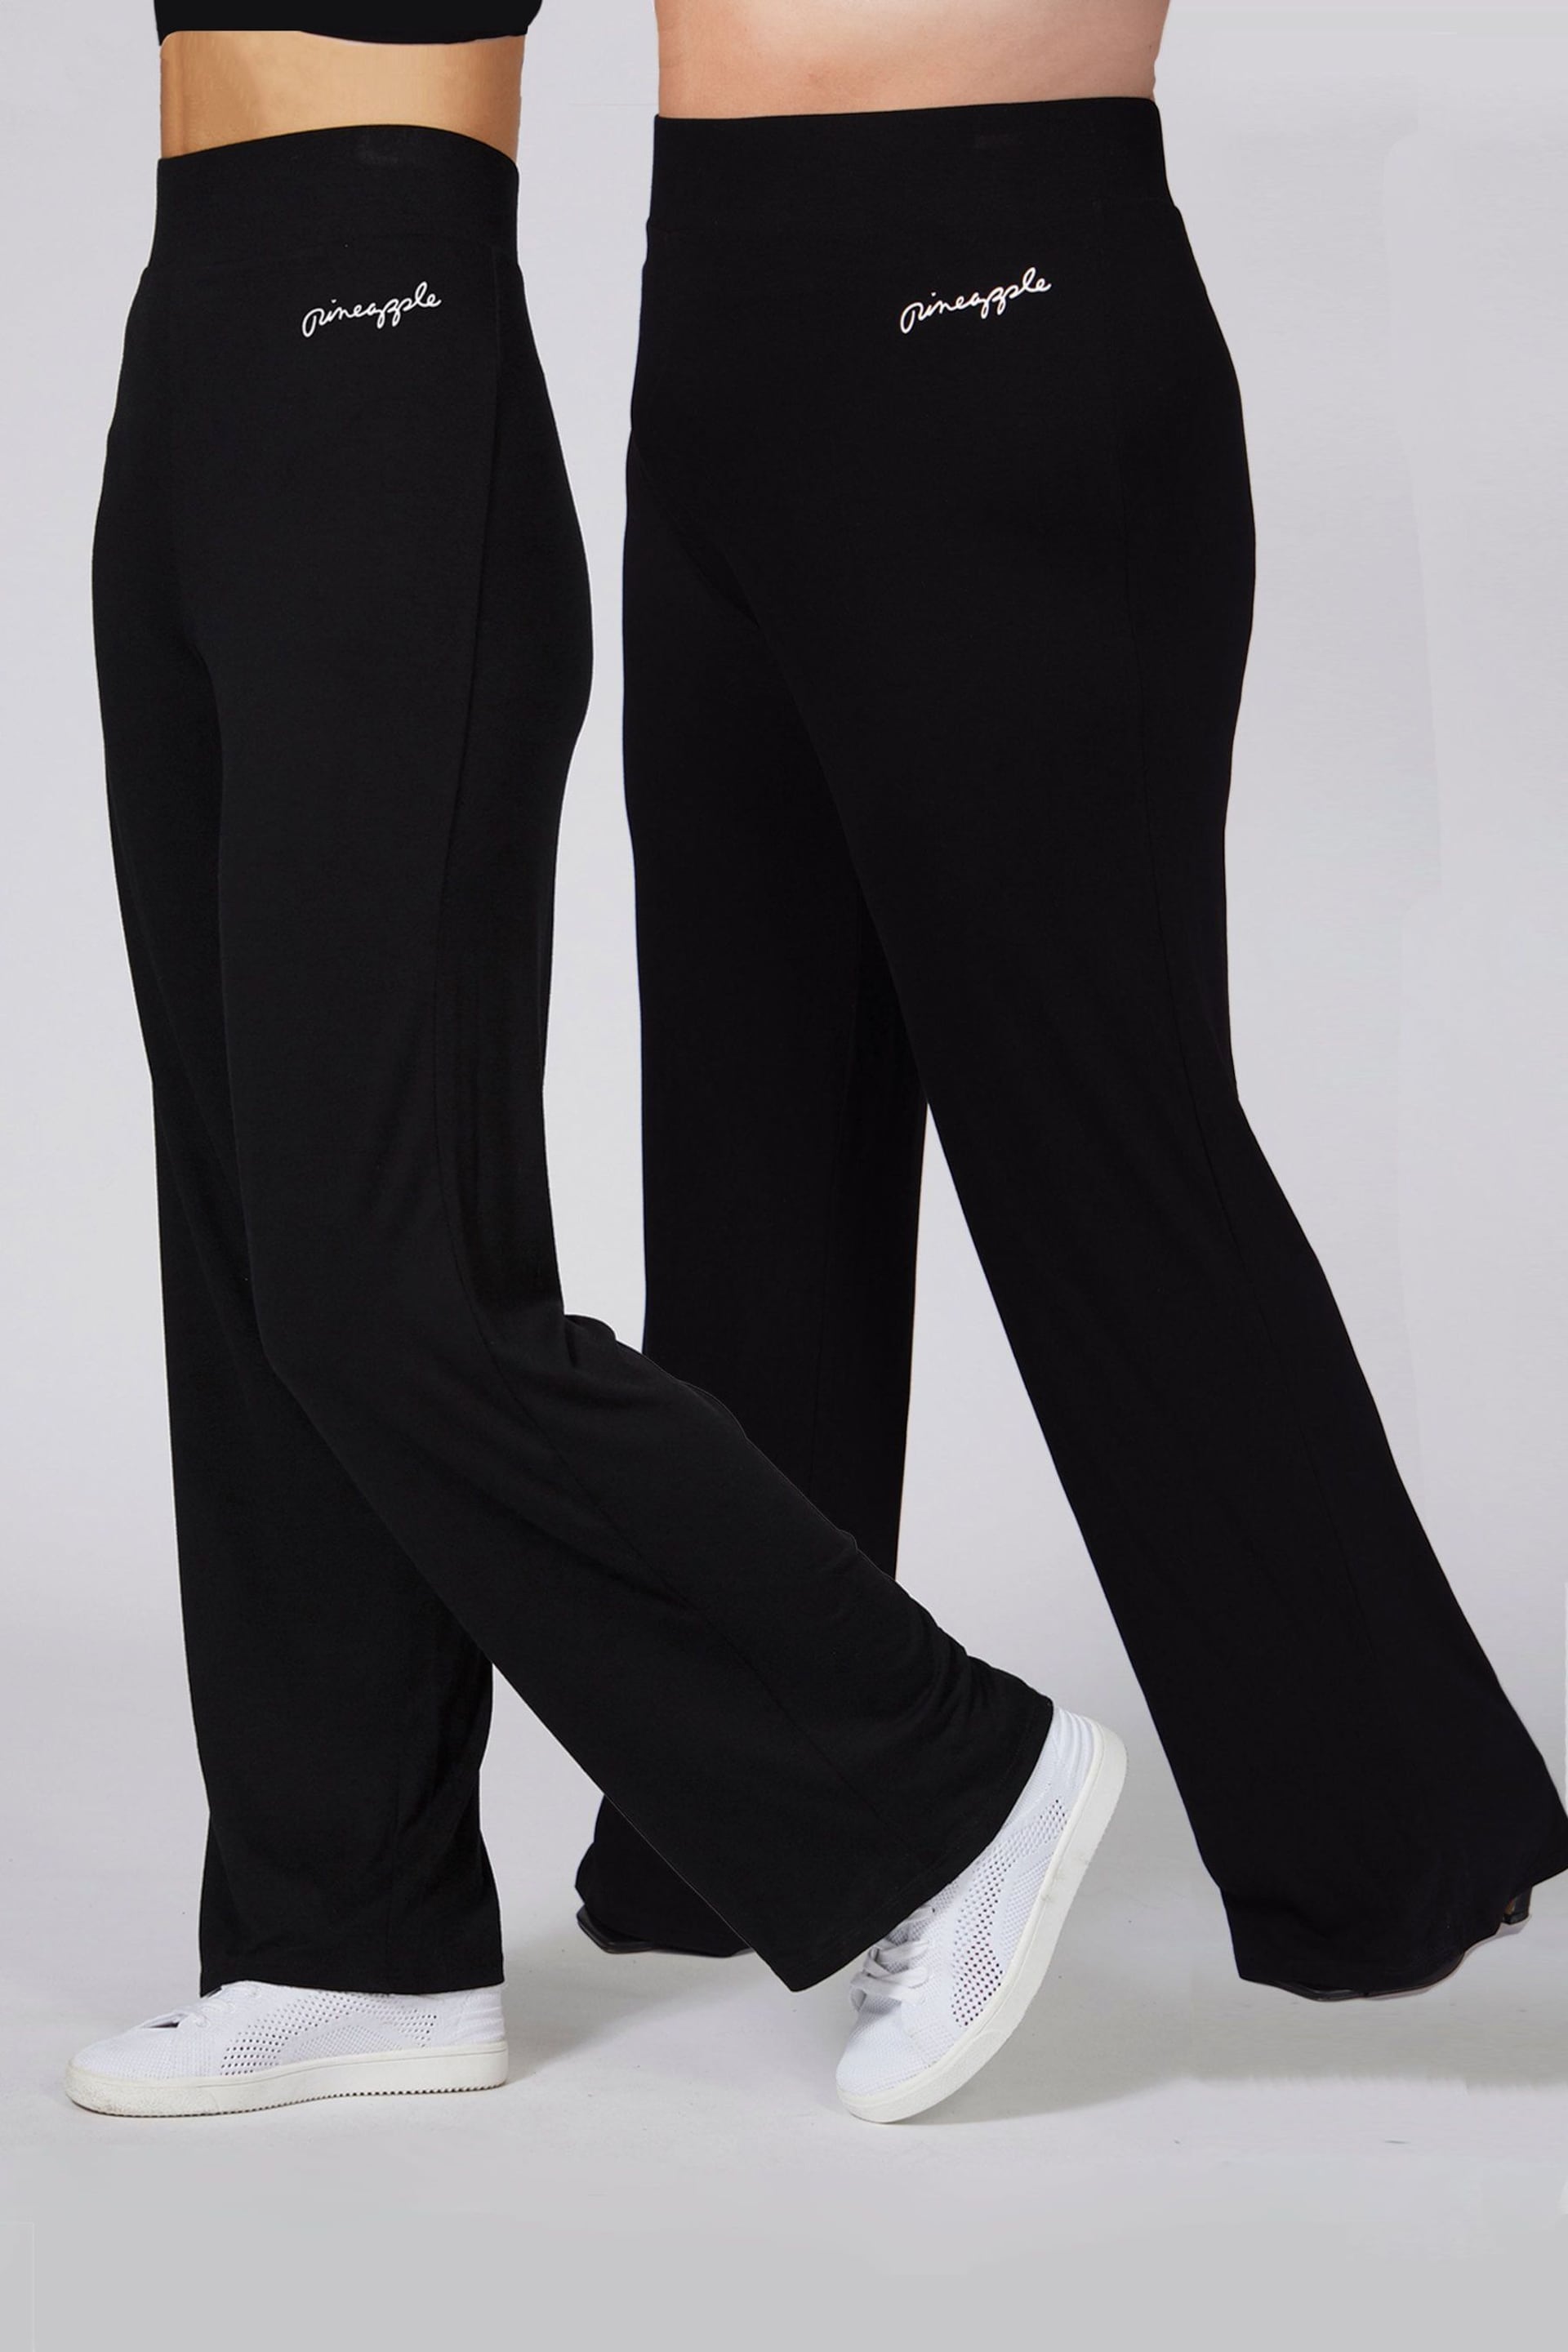 Pineapple Black Viscose Jersey Trousers - Image 2 of 3